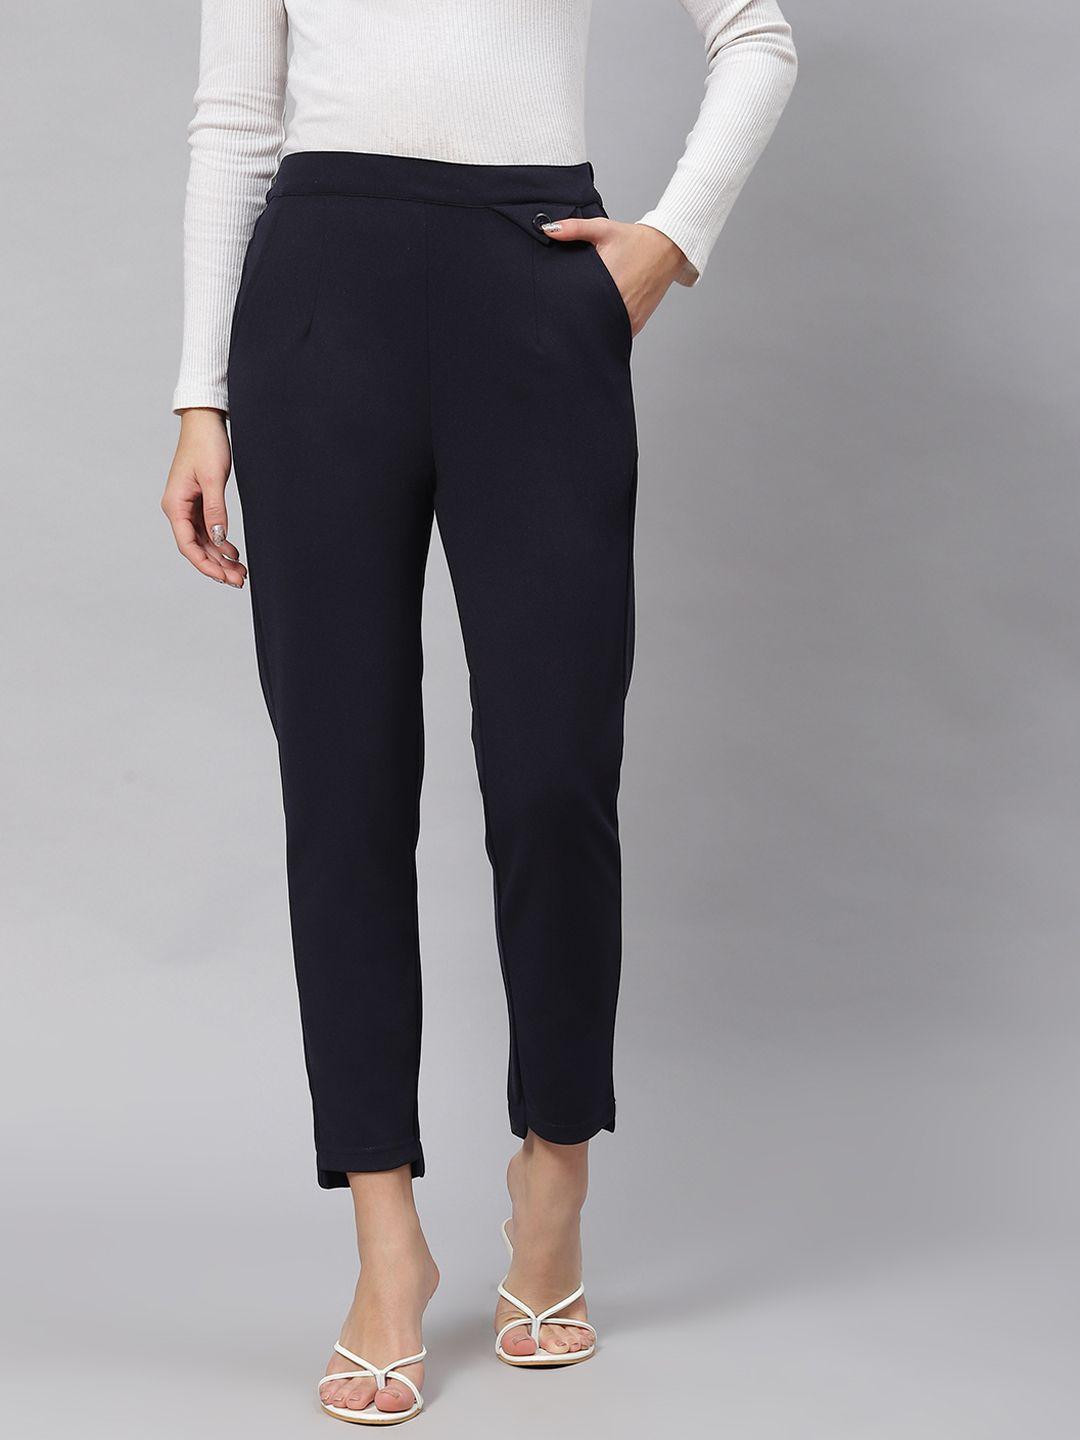 pluss women navy blue solid mid-rise regular fit trousers